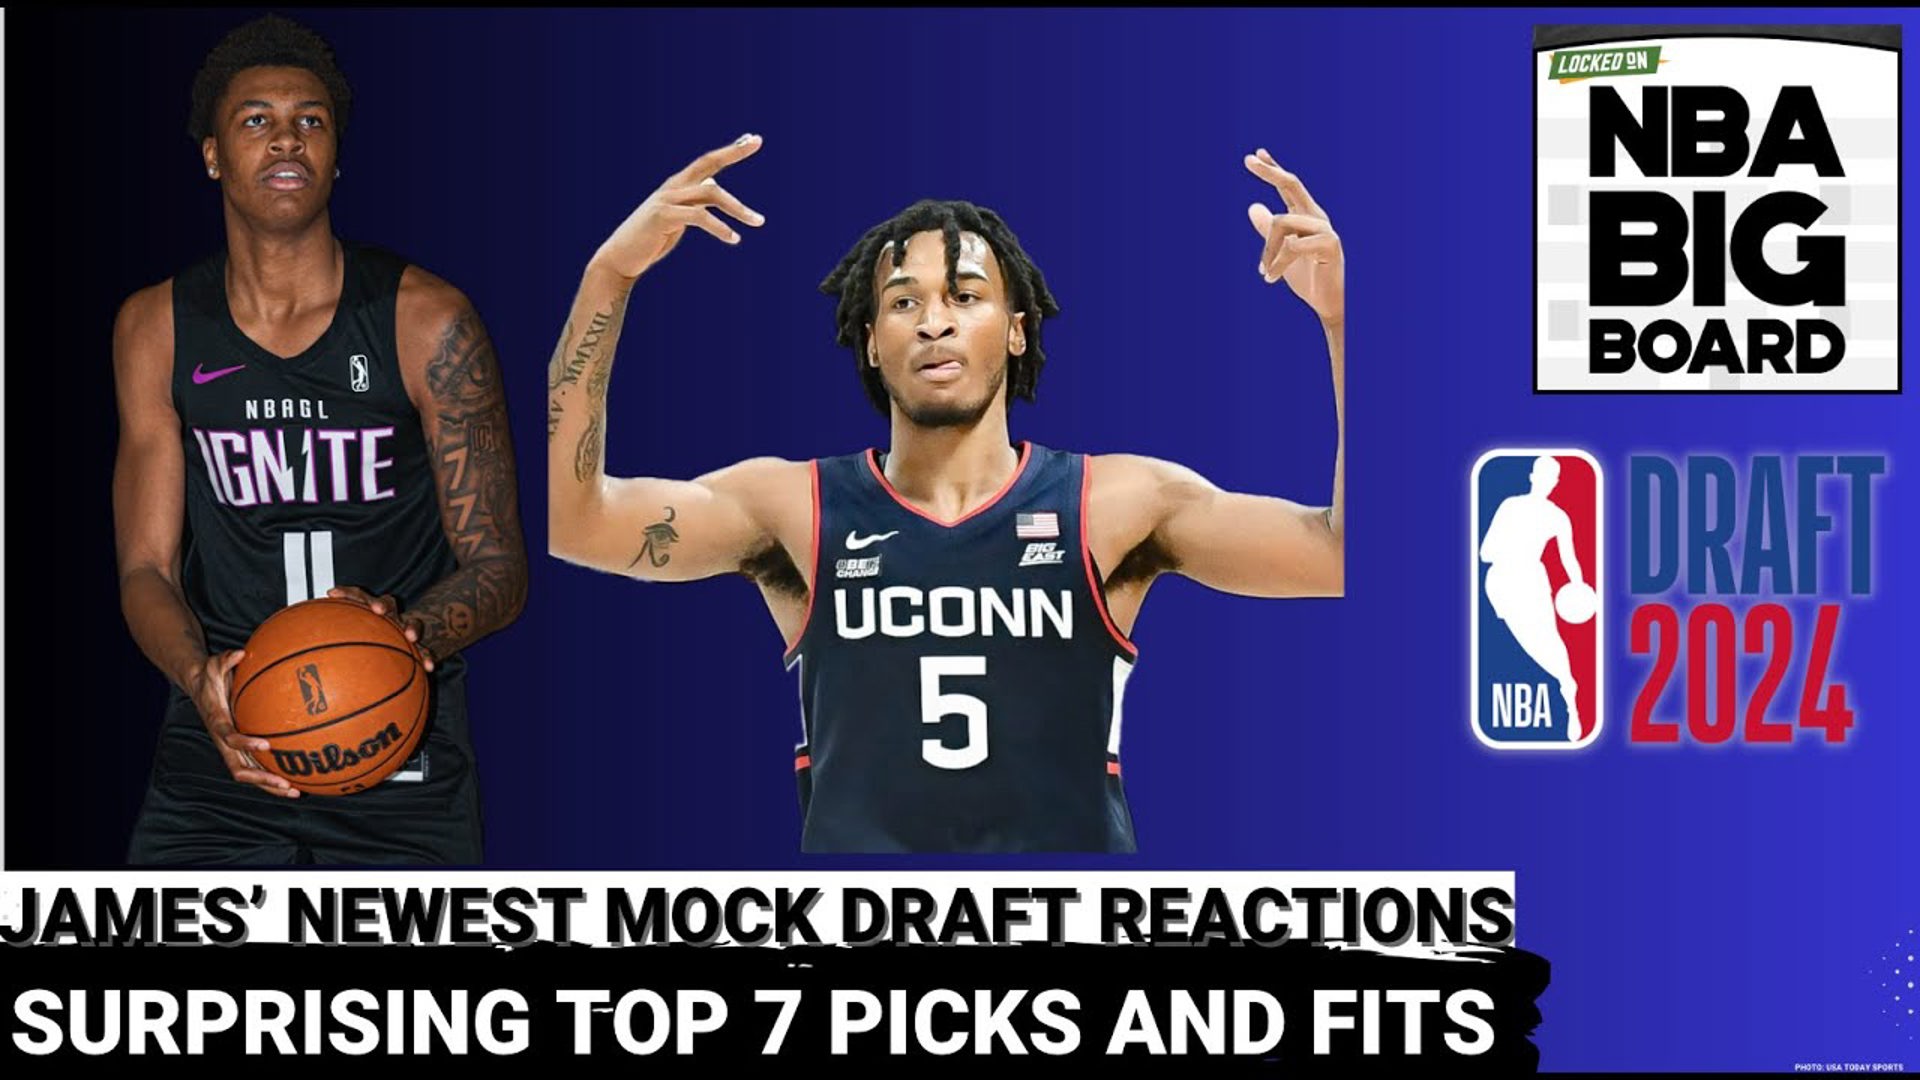 Rich and James break down the first half of the lottery mock draft that James recently dropped, with some surprising picks in the top 7, including Stephon Castle 2nd